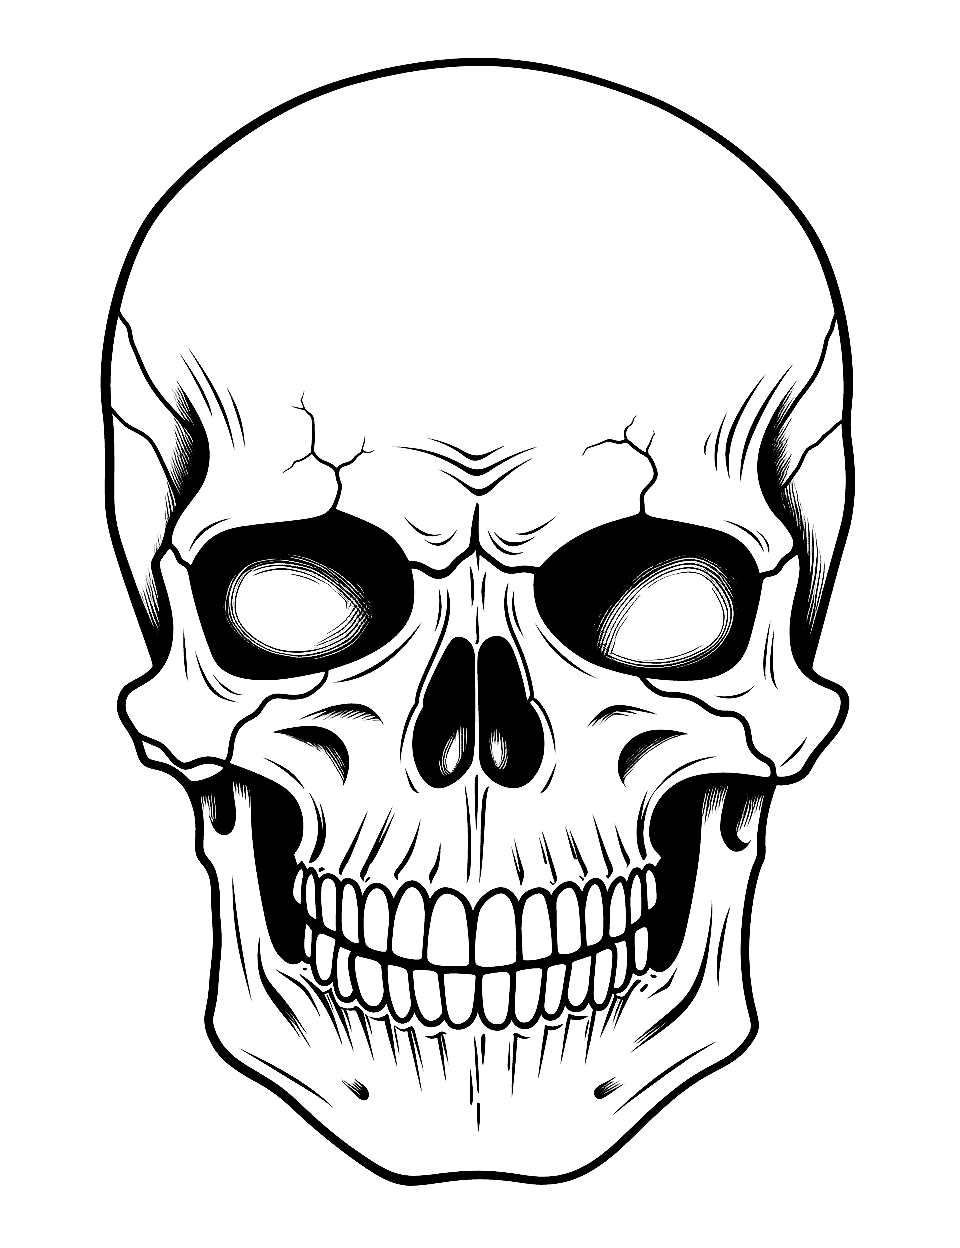 Anatomy Lesson Coloring Page - A detailed cracked skull drawing, focusing on the bone structure.